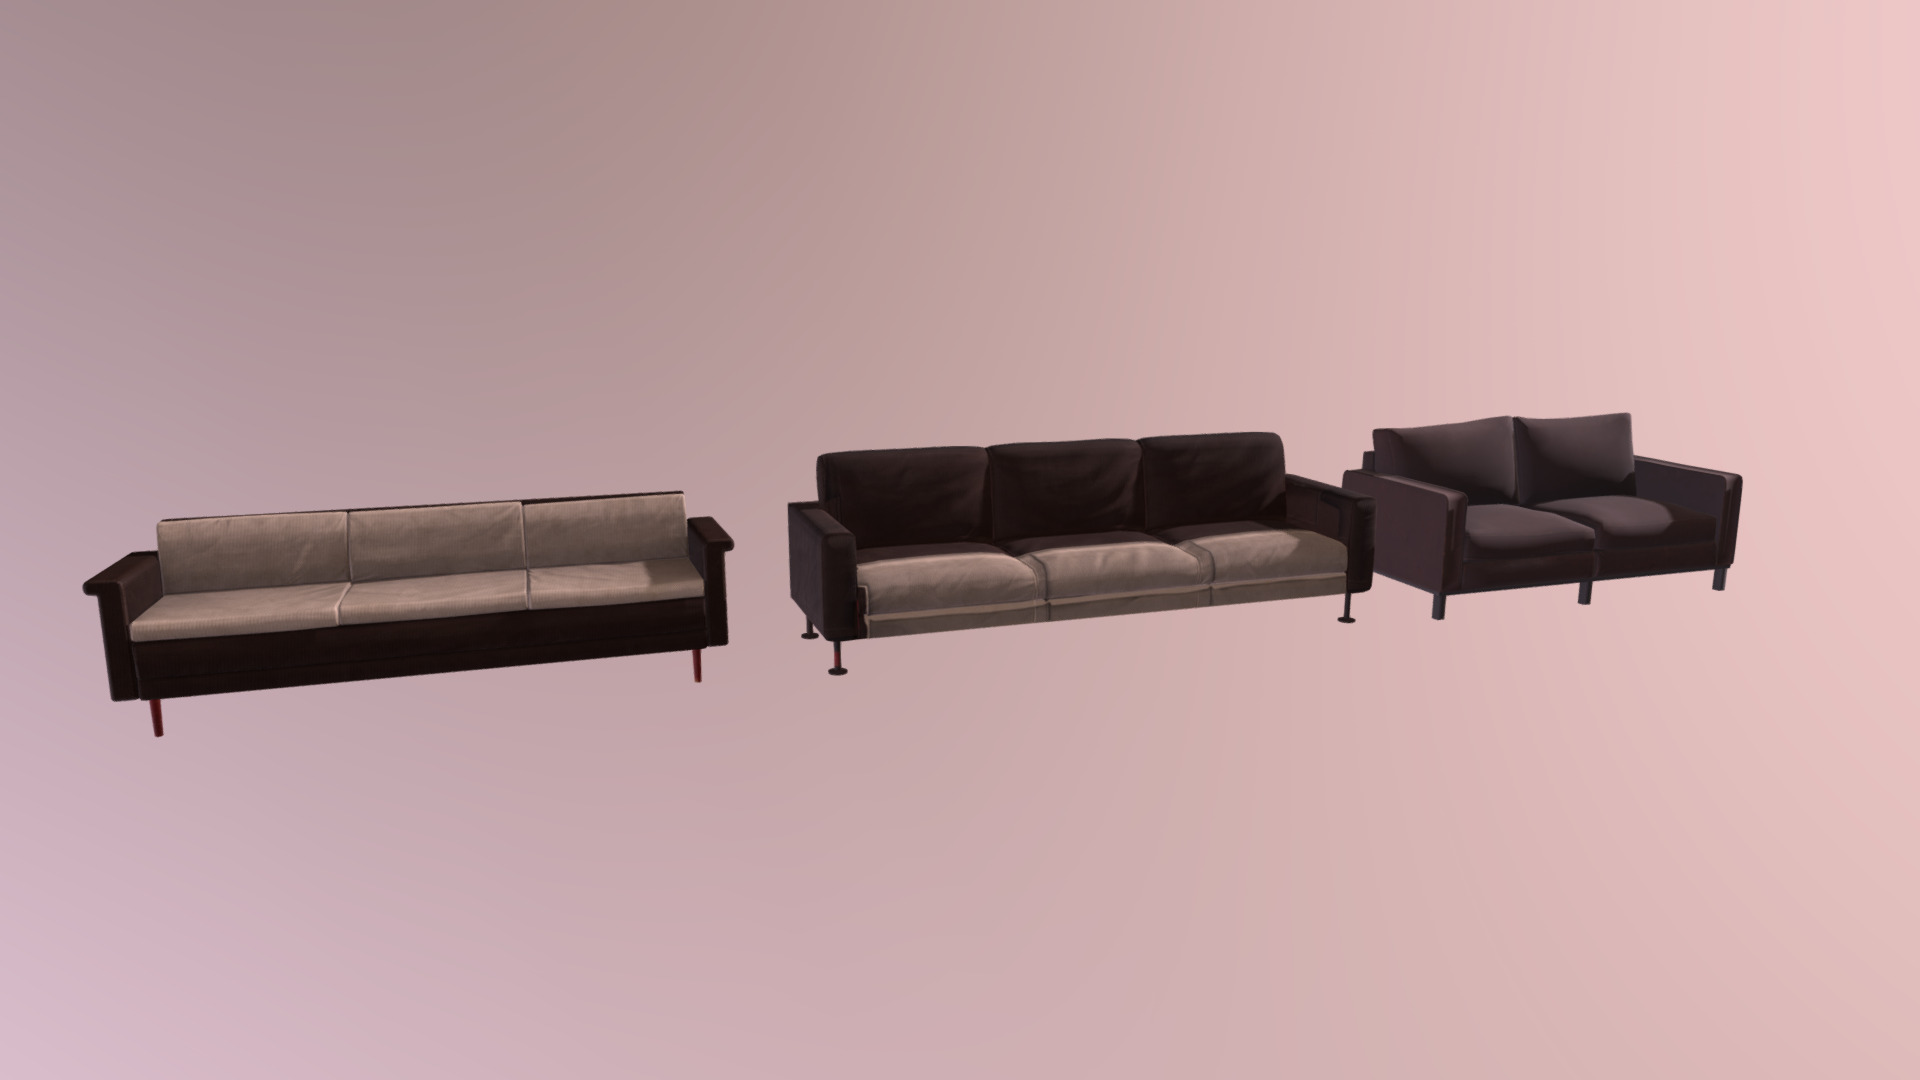 3D model Low Poly Sofas - This is a 3D model of the Low Poly Sofas. The 3D model is about a group of black leather couches.